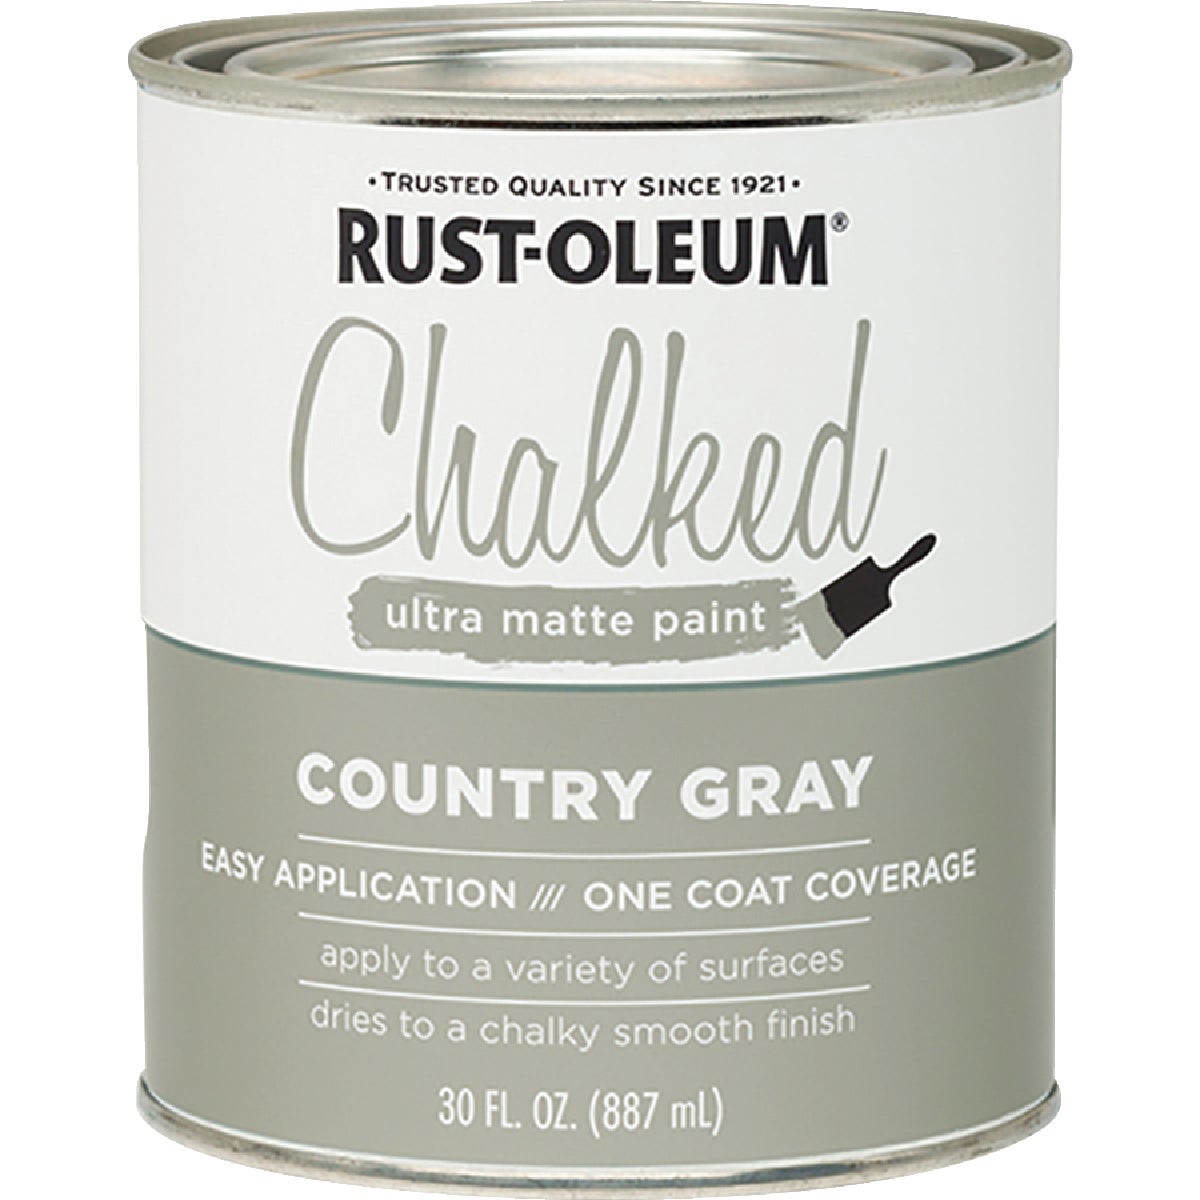 Rust-Oleum Chalked Country Gray Ultra Matte 30 Oz. Chalk Paint